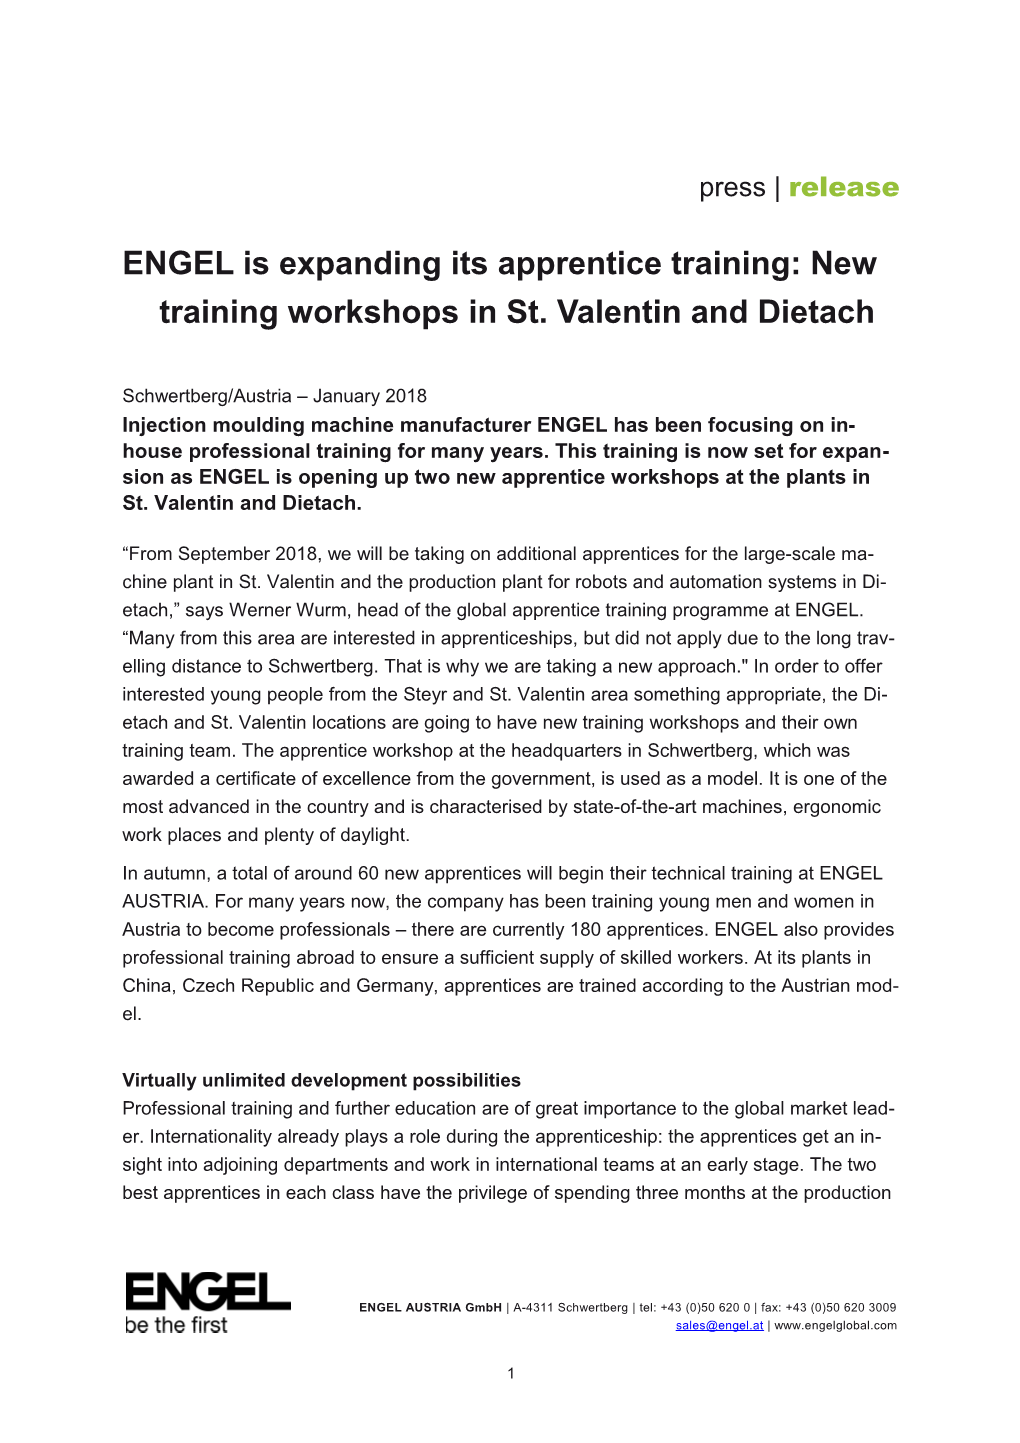 ENGEL Is Expanding Its Apprentice Training: New Training Workshops in St. Valentin and Dietach